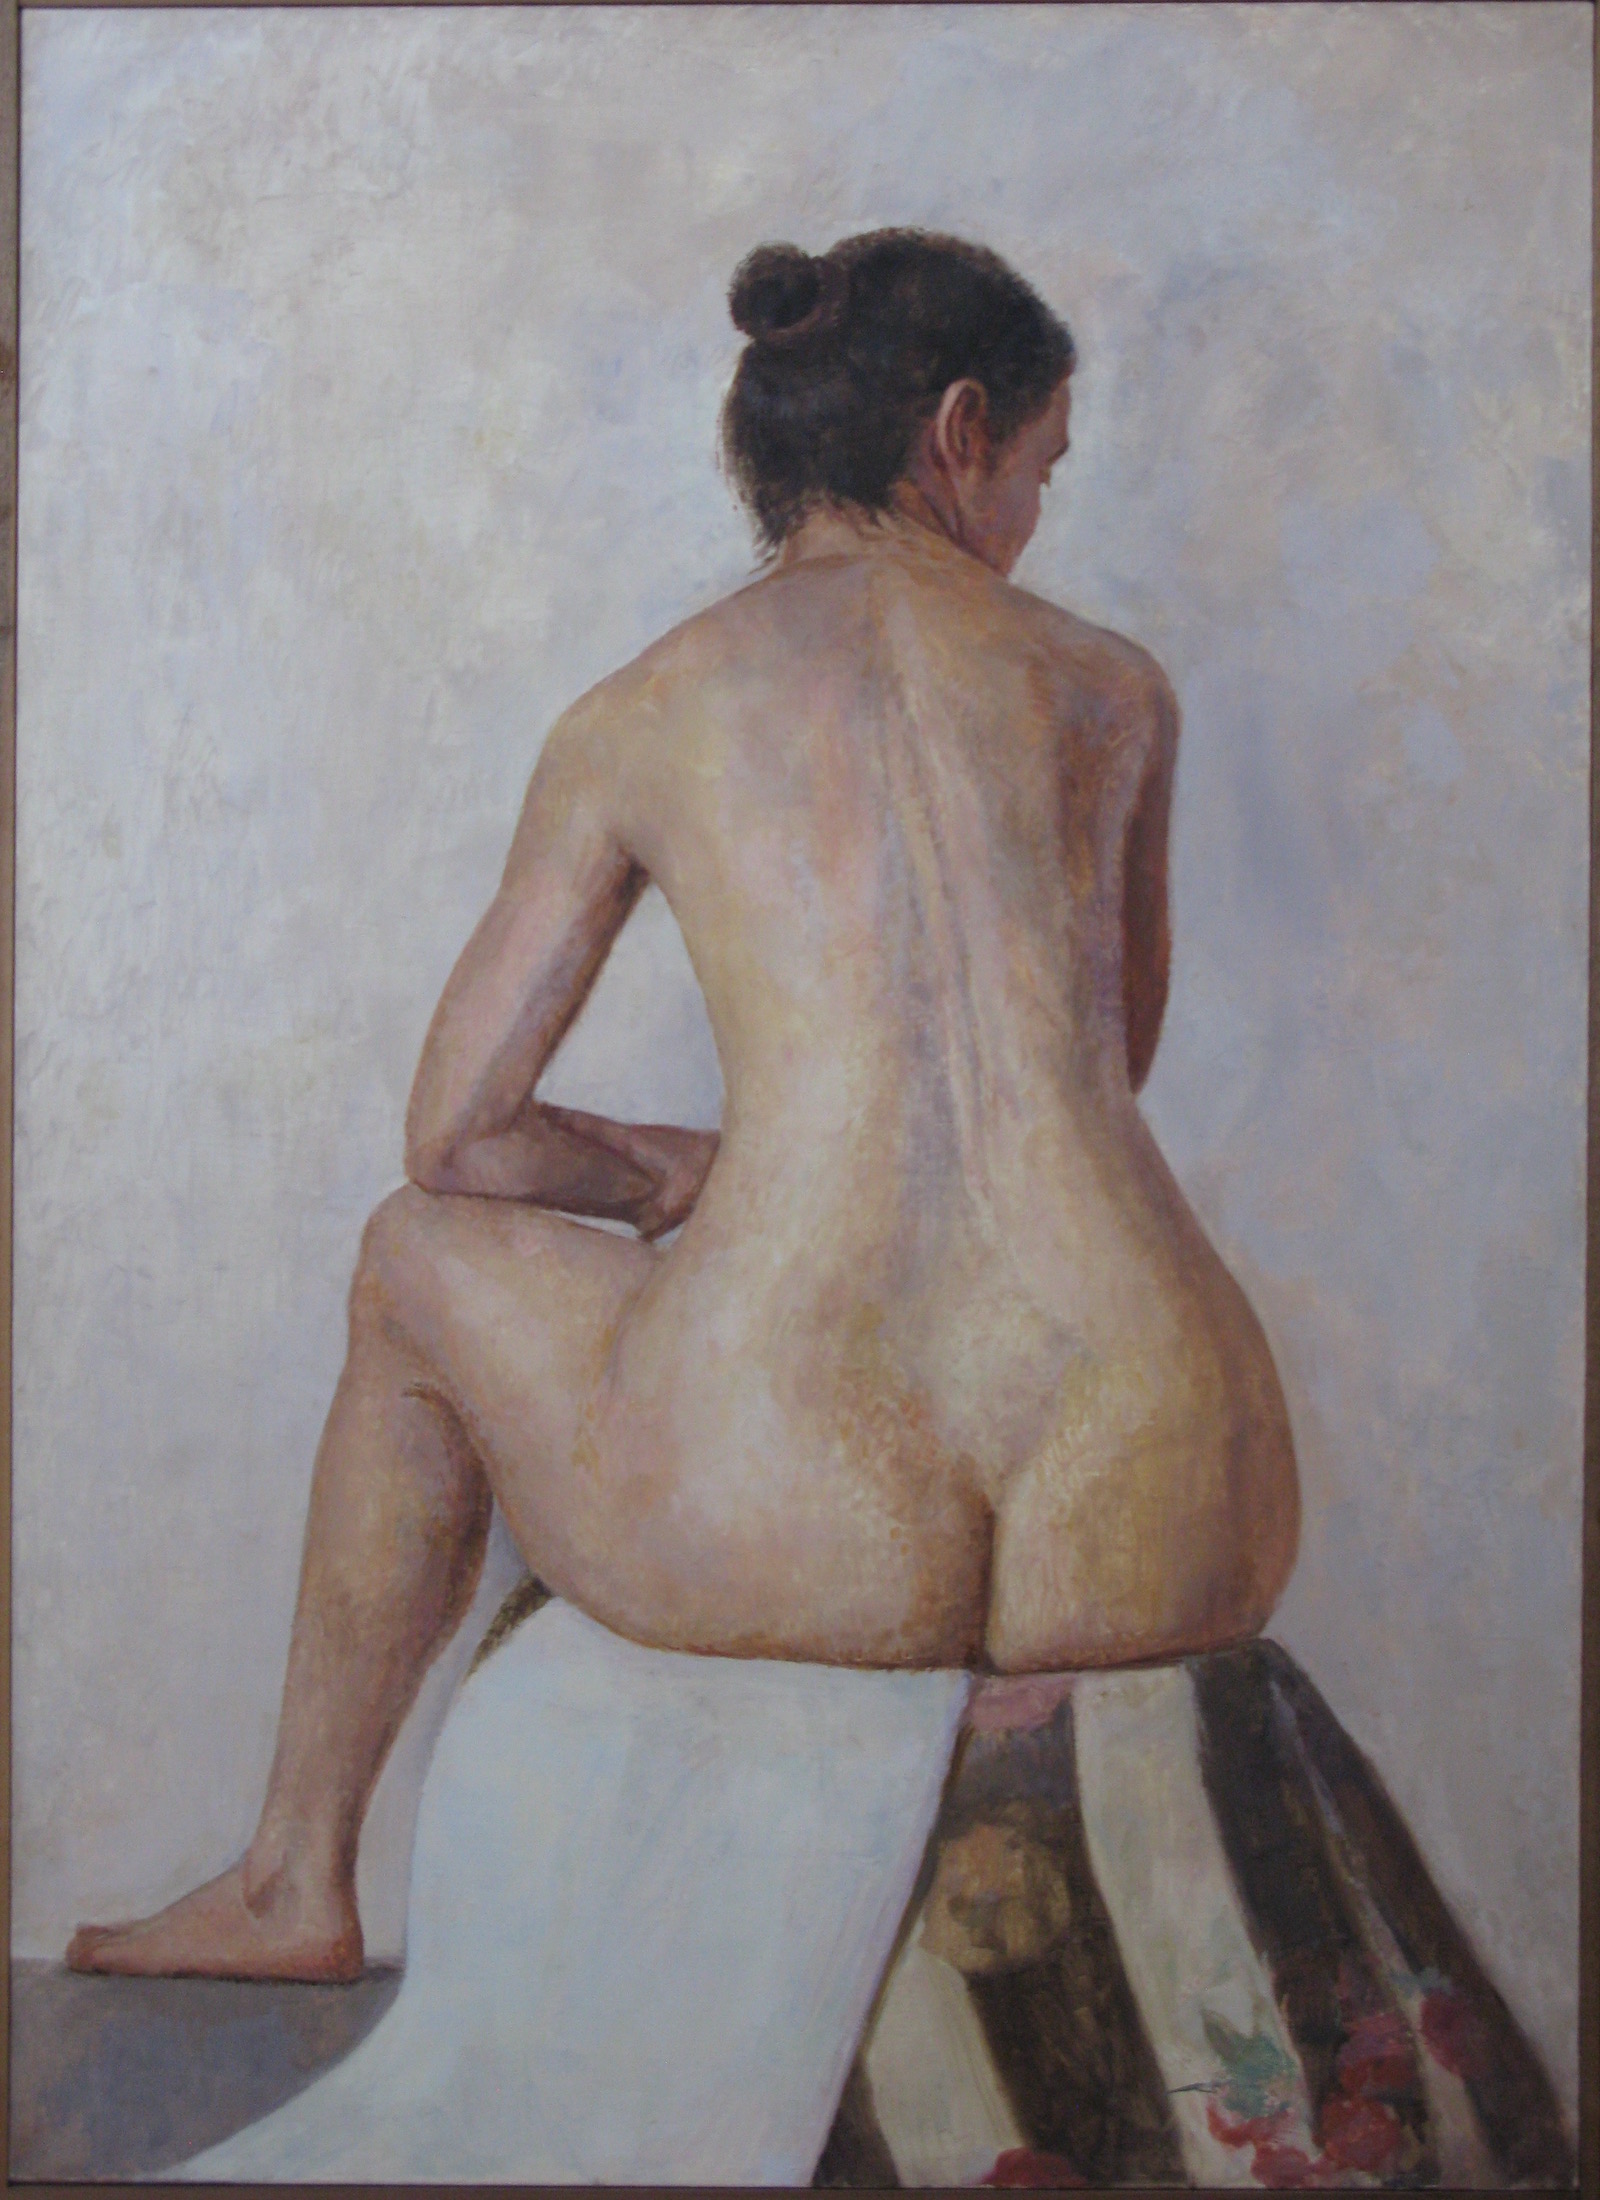 Seated Nude, 50 x 36 inches, oil on linen, 1998.